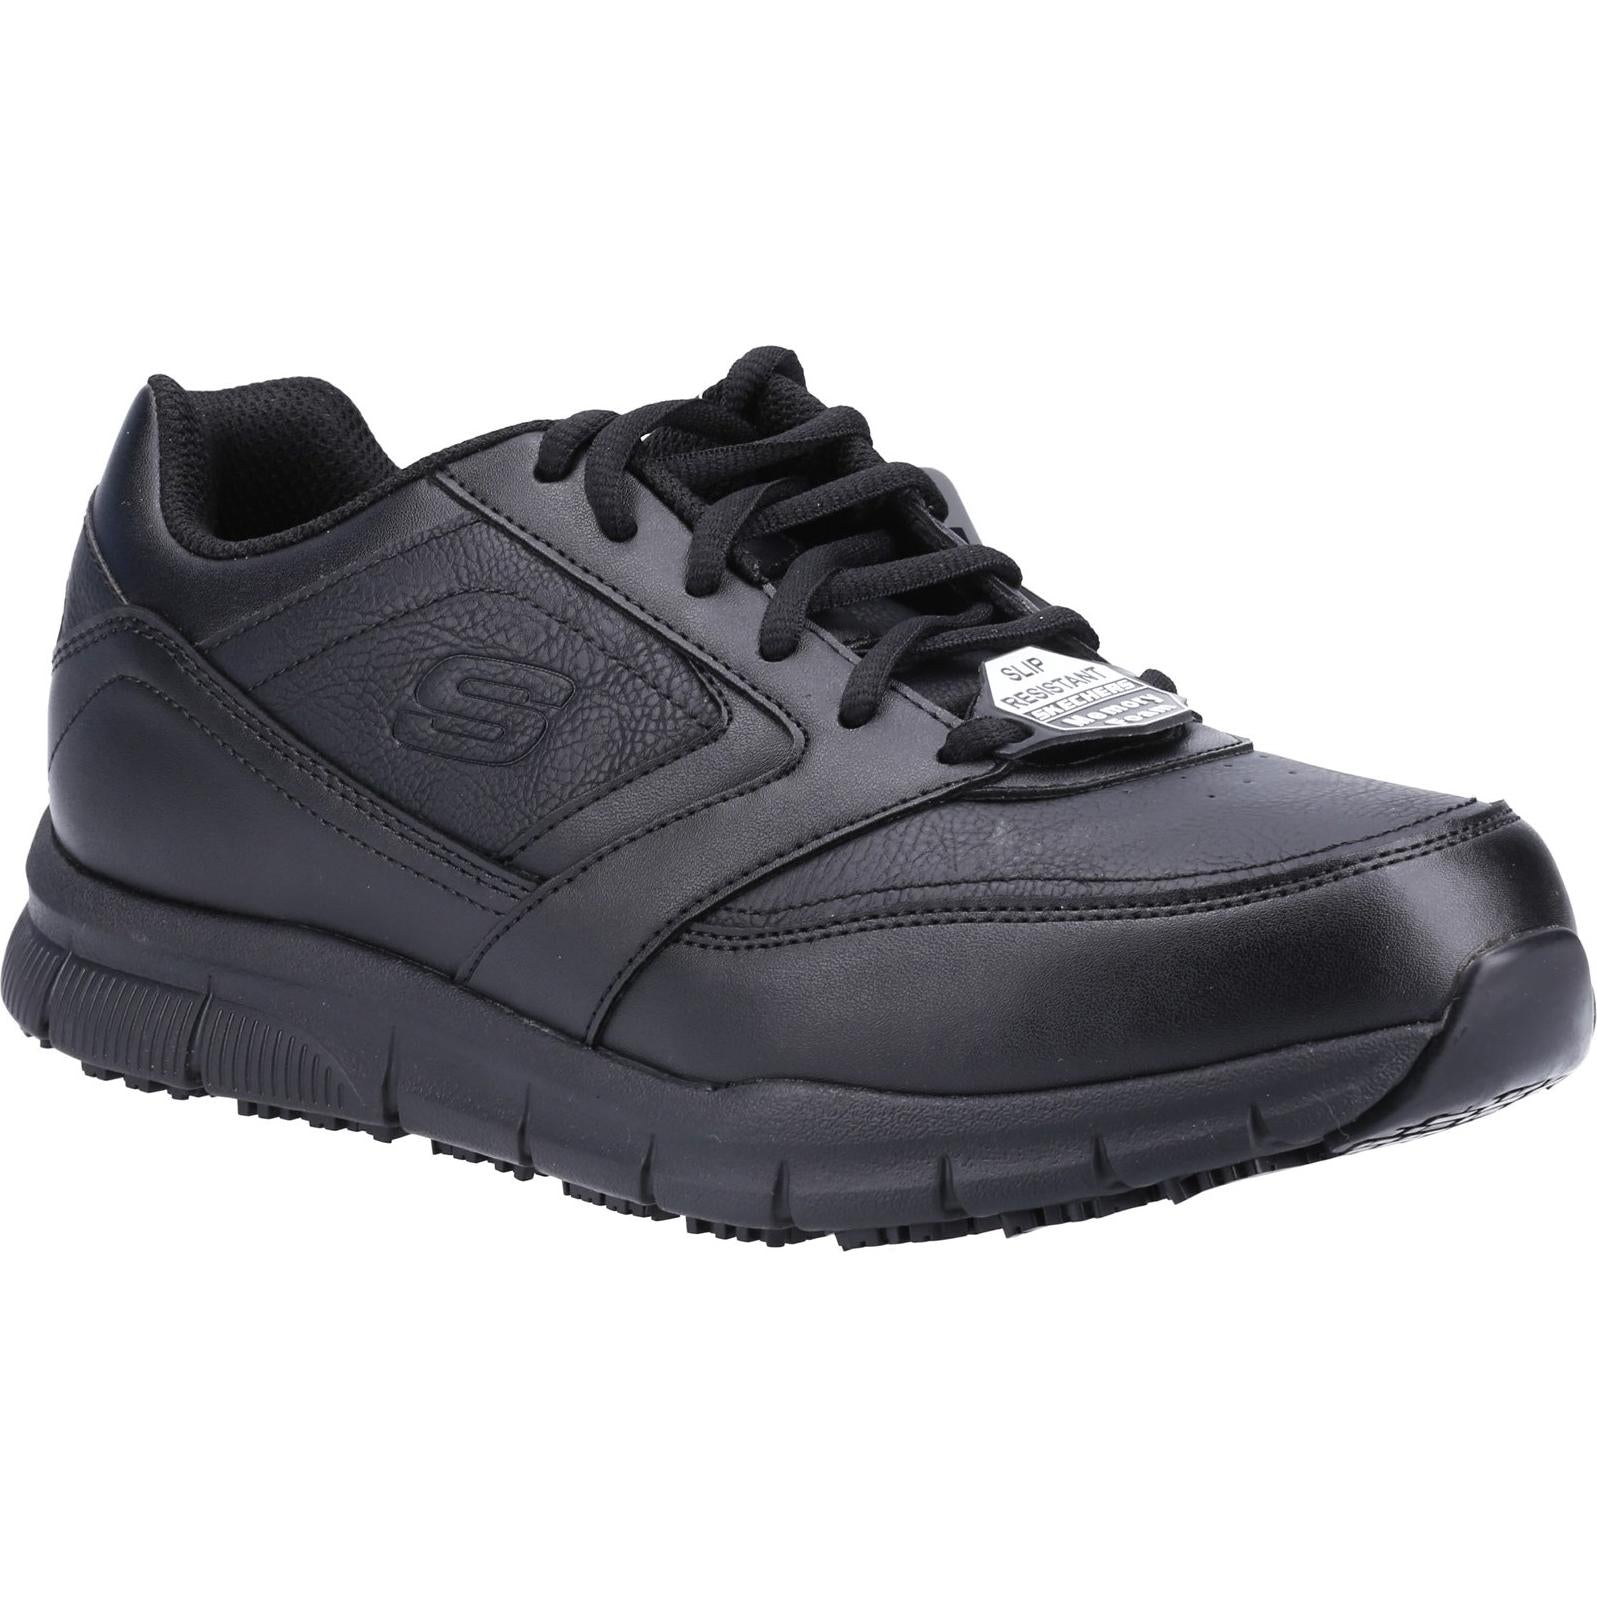 Skechers Nampa Occupational Shoes